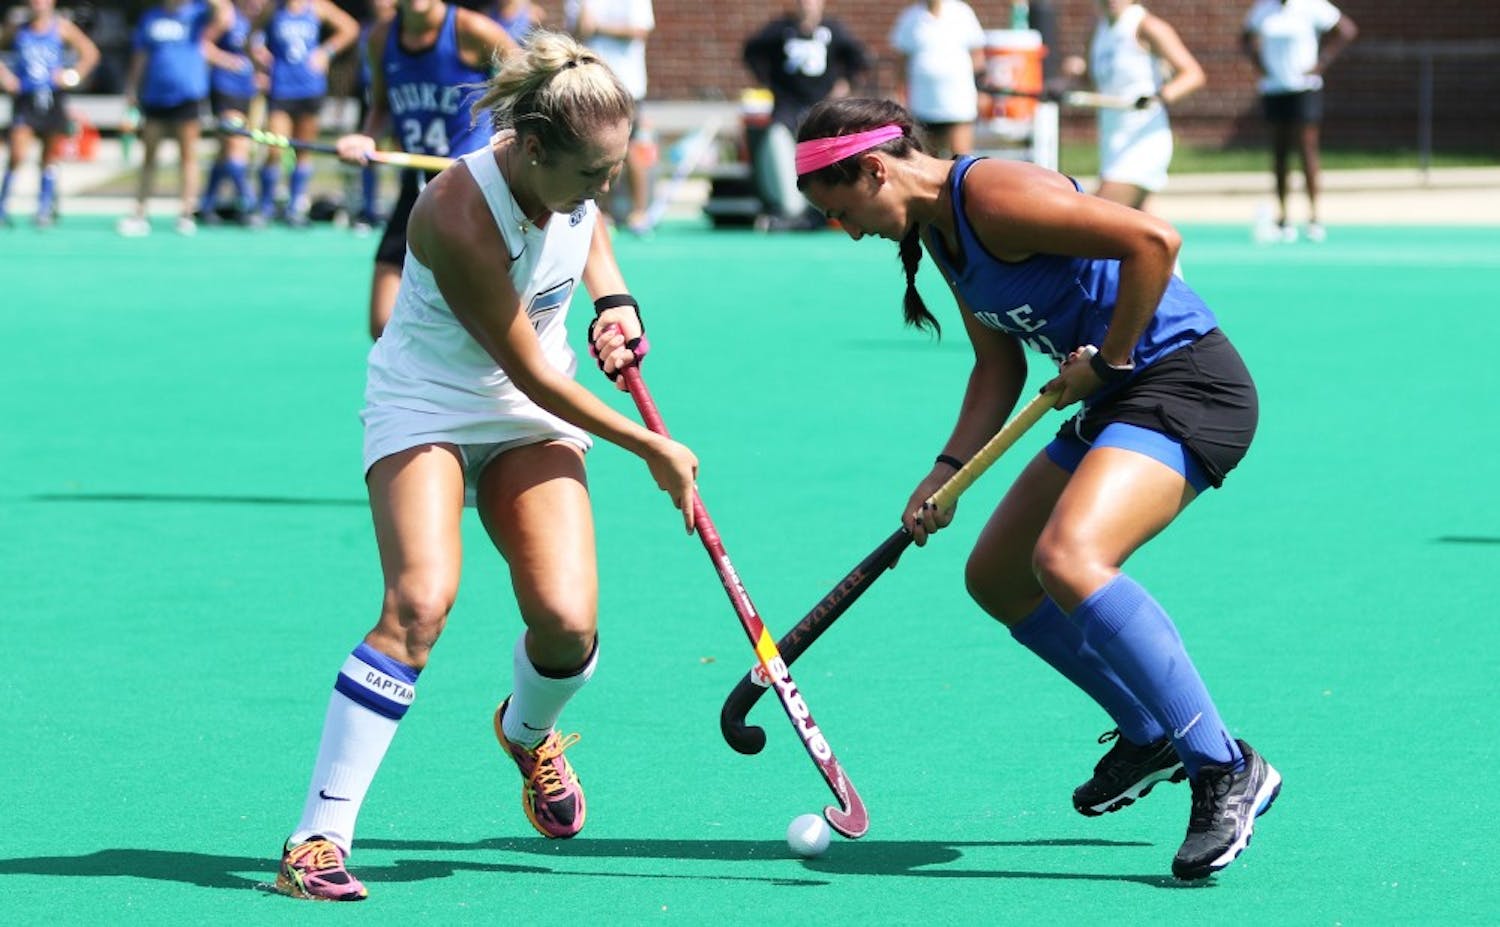 The Blue Devils will need to rely on guidance from upperclassmen like senior Caroline Andretta to hold off two talented teams from the Northeast.